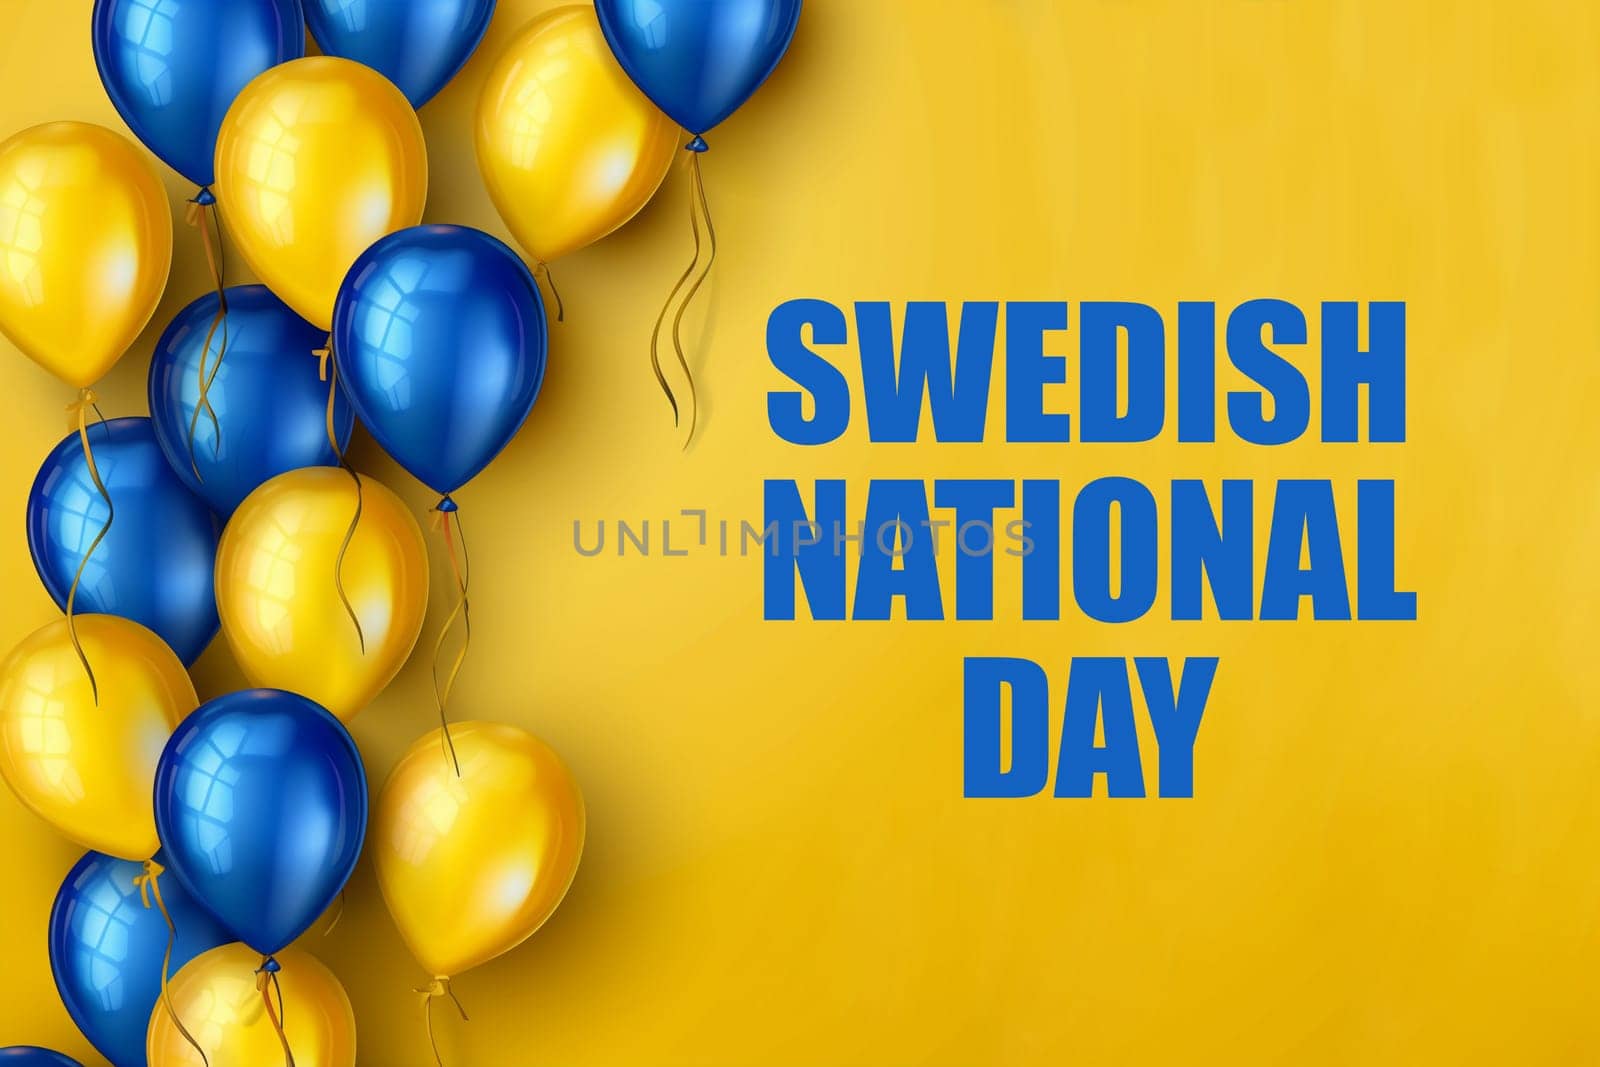 People celebrating Swedish National Day with blue and yellow balloons in a festive atmosphere.